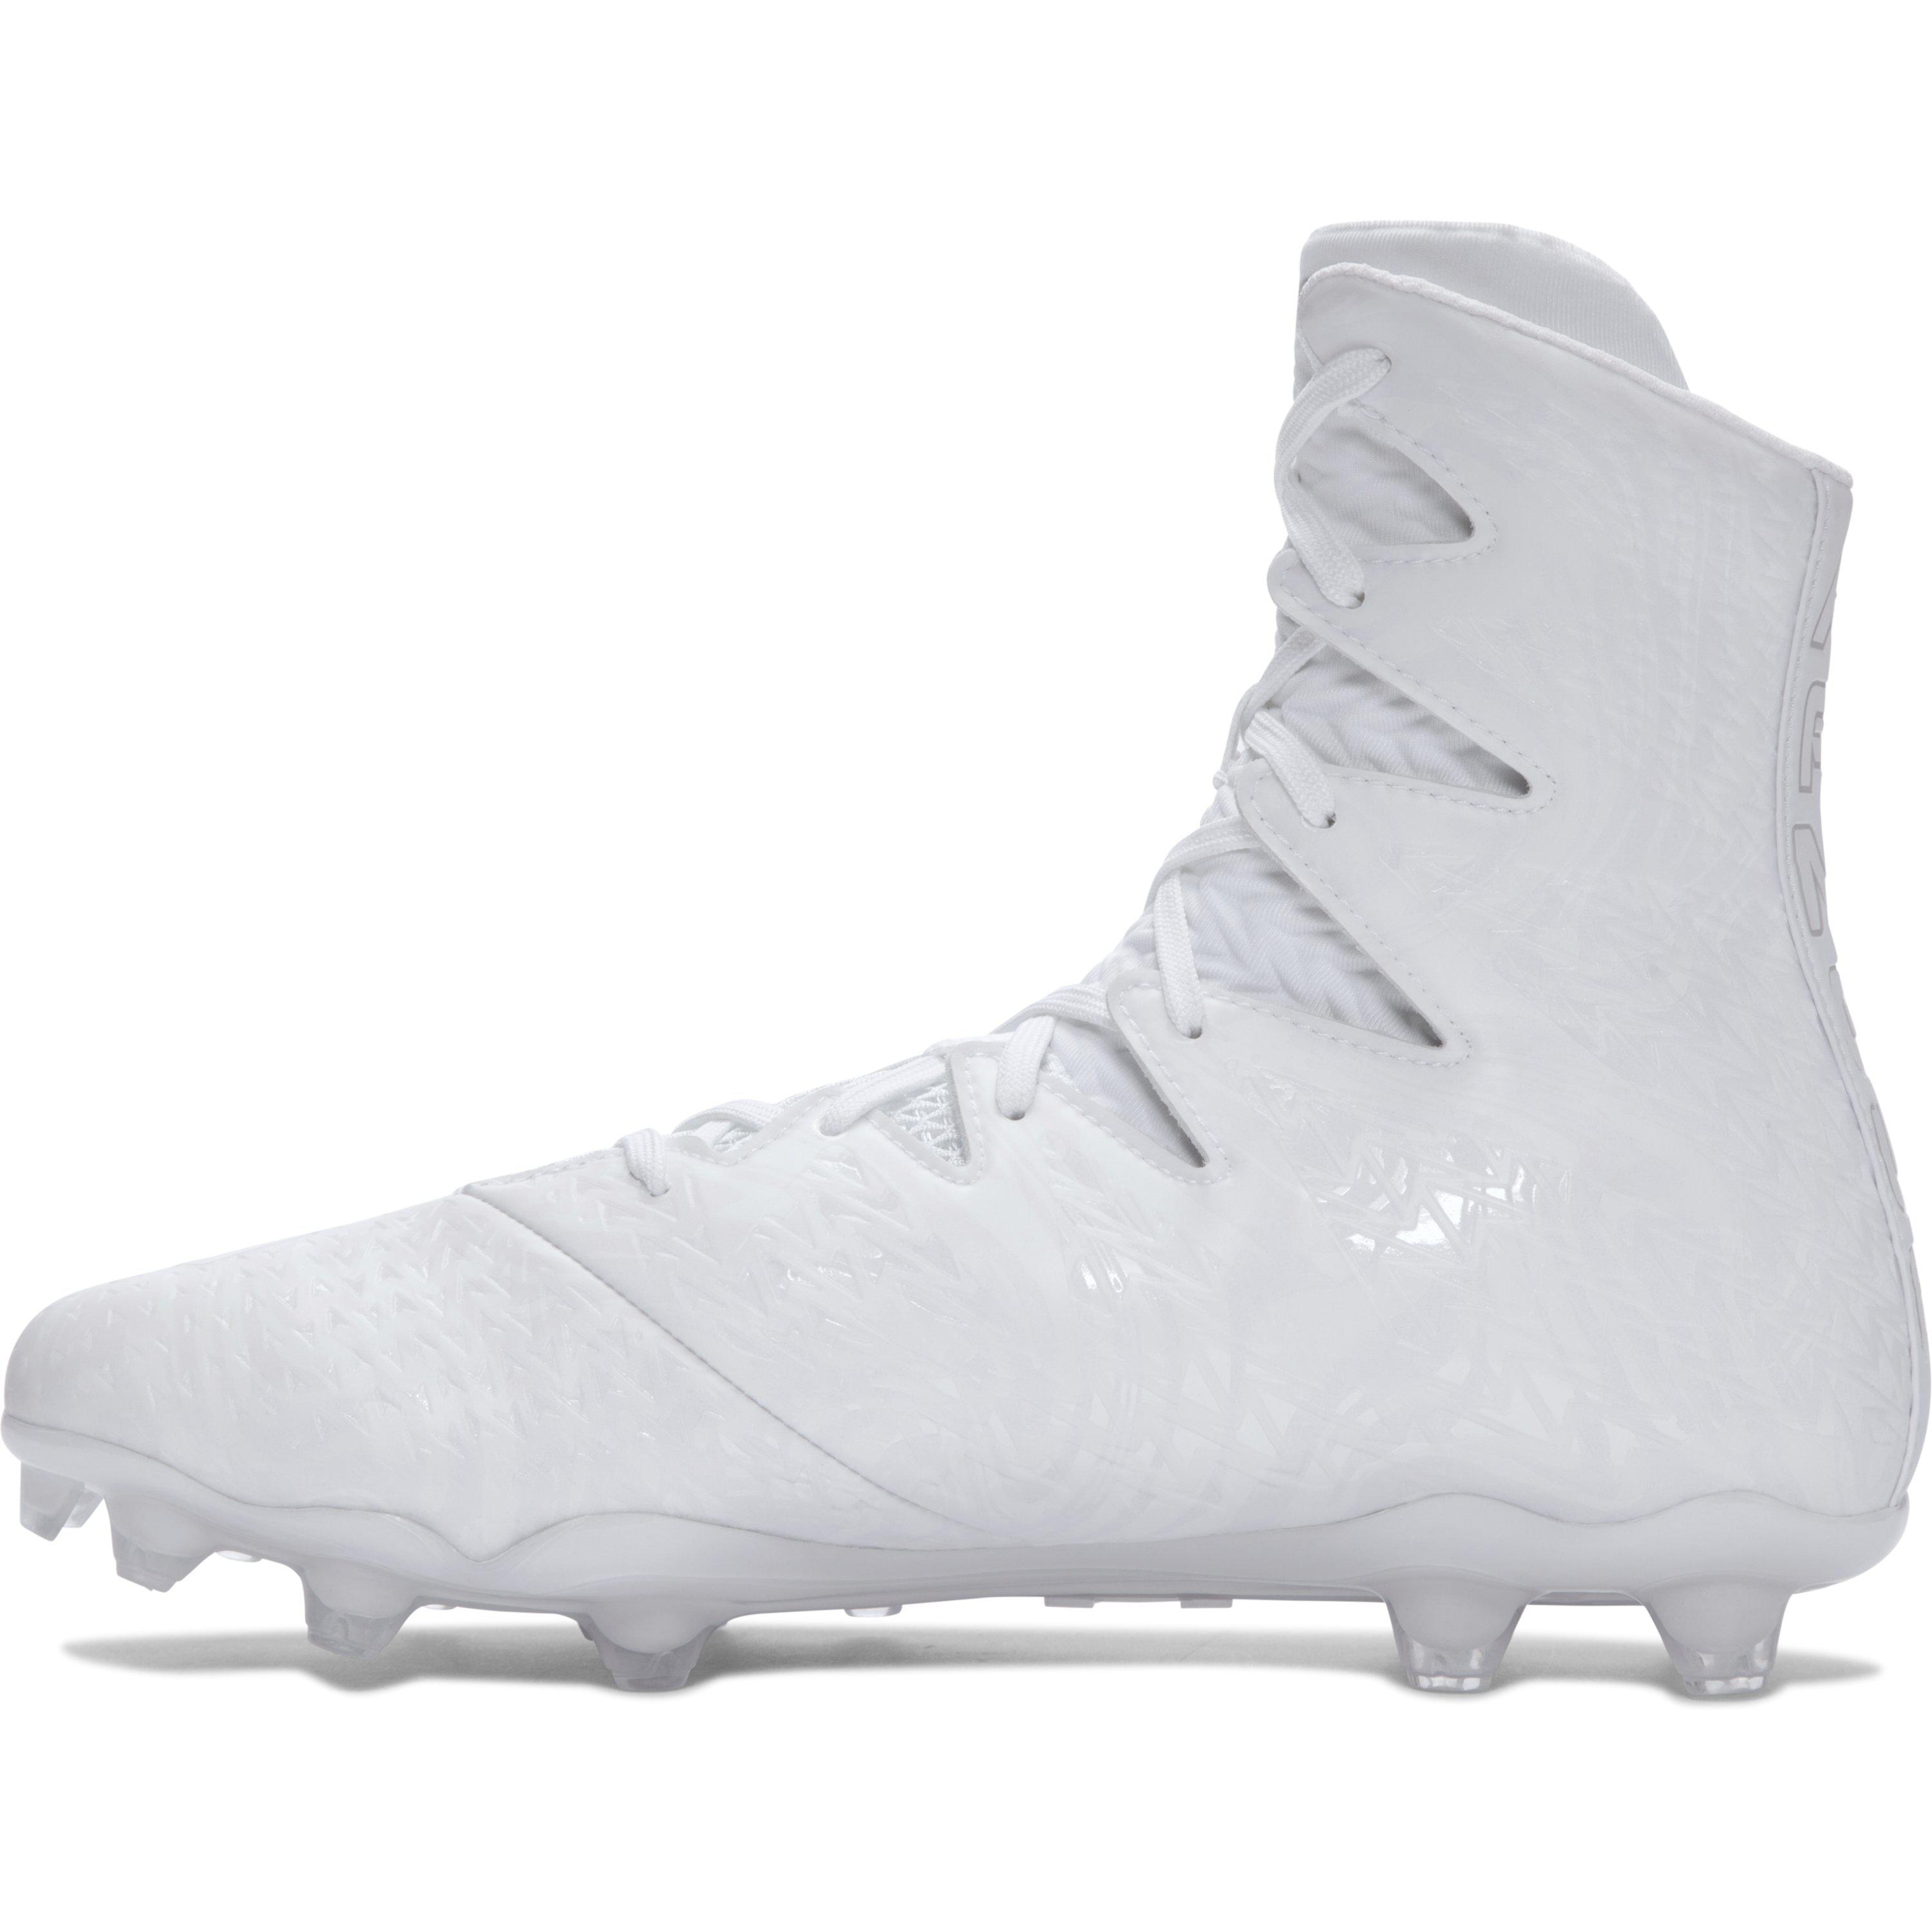 Under Armour UA Highlight LUX MC Football Cleats Size 14 ClutchFit MSRP $130